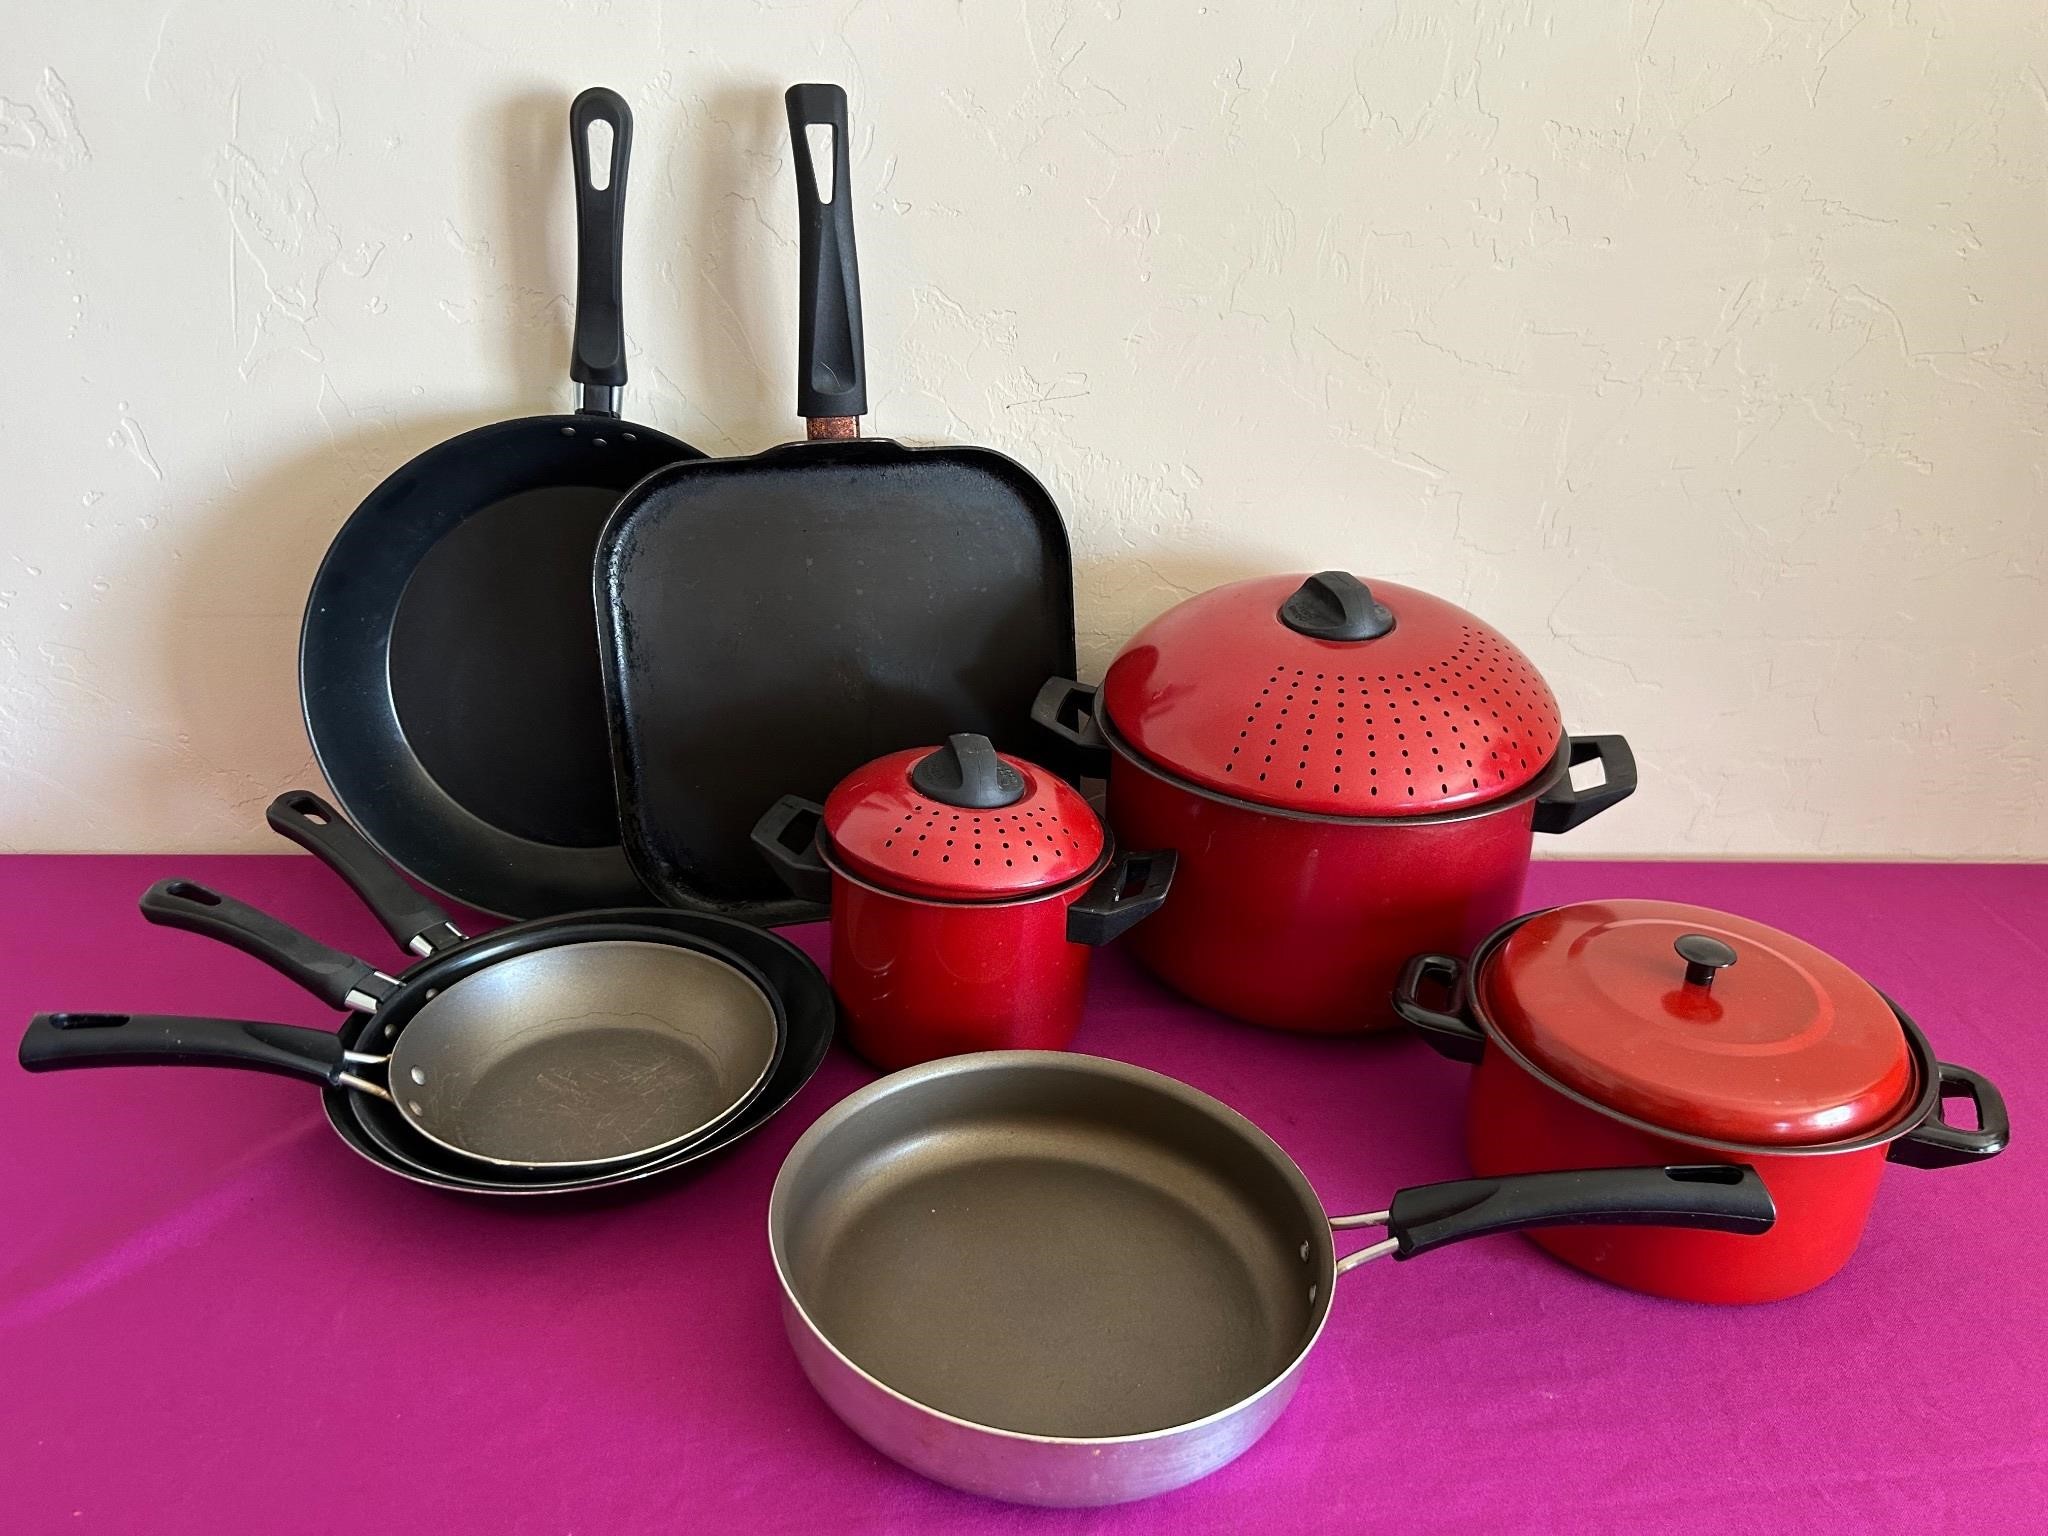 Frying Pans and Red Pots